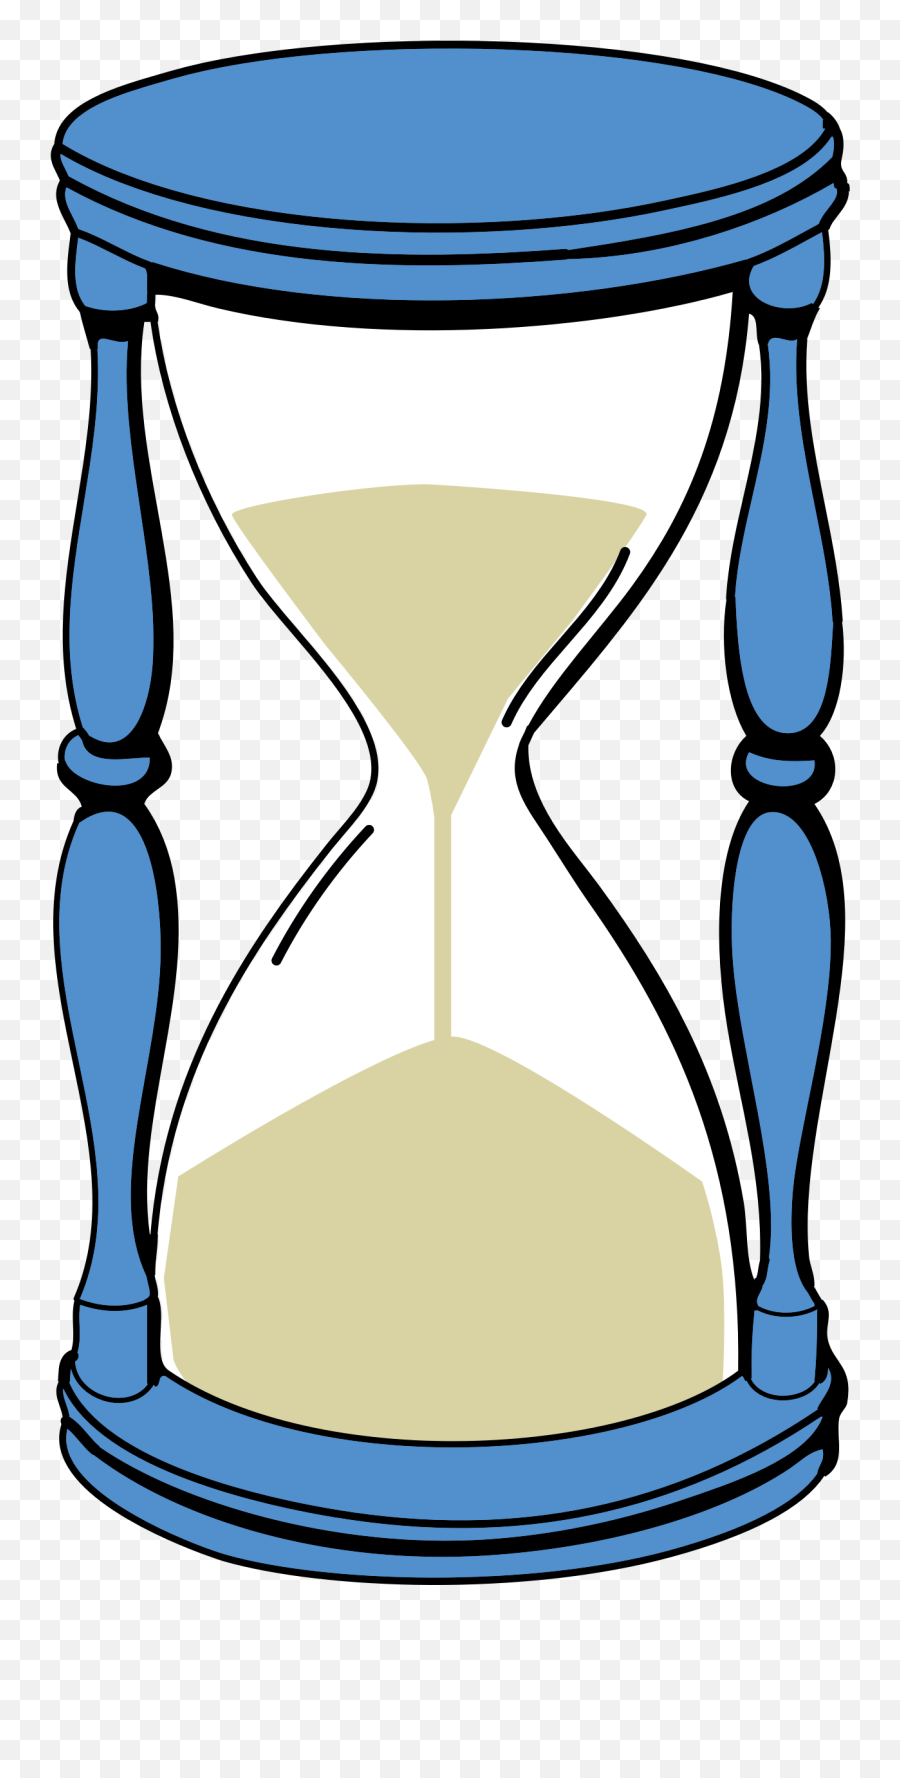 Hourglass With Sand Clip Art At Clker - Clip Art Time Capsule Emoji,Sand Clipart